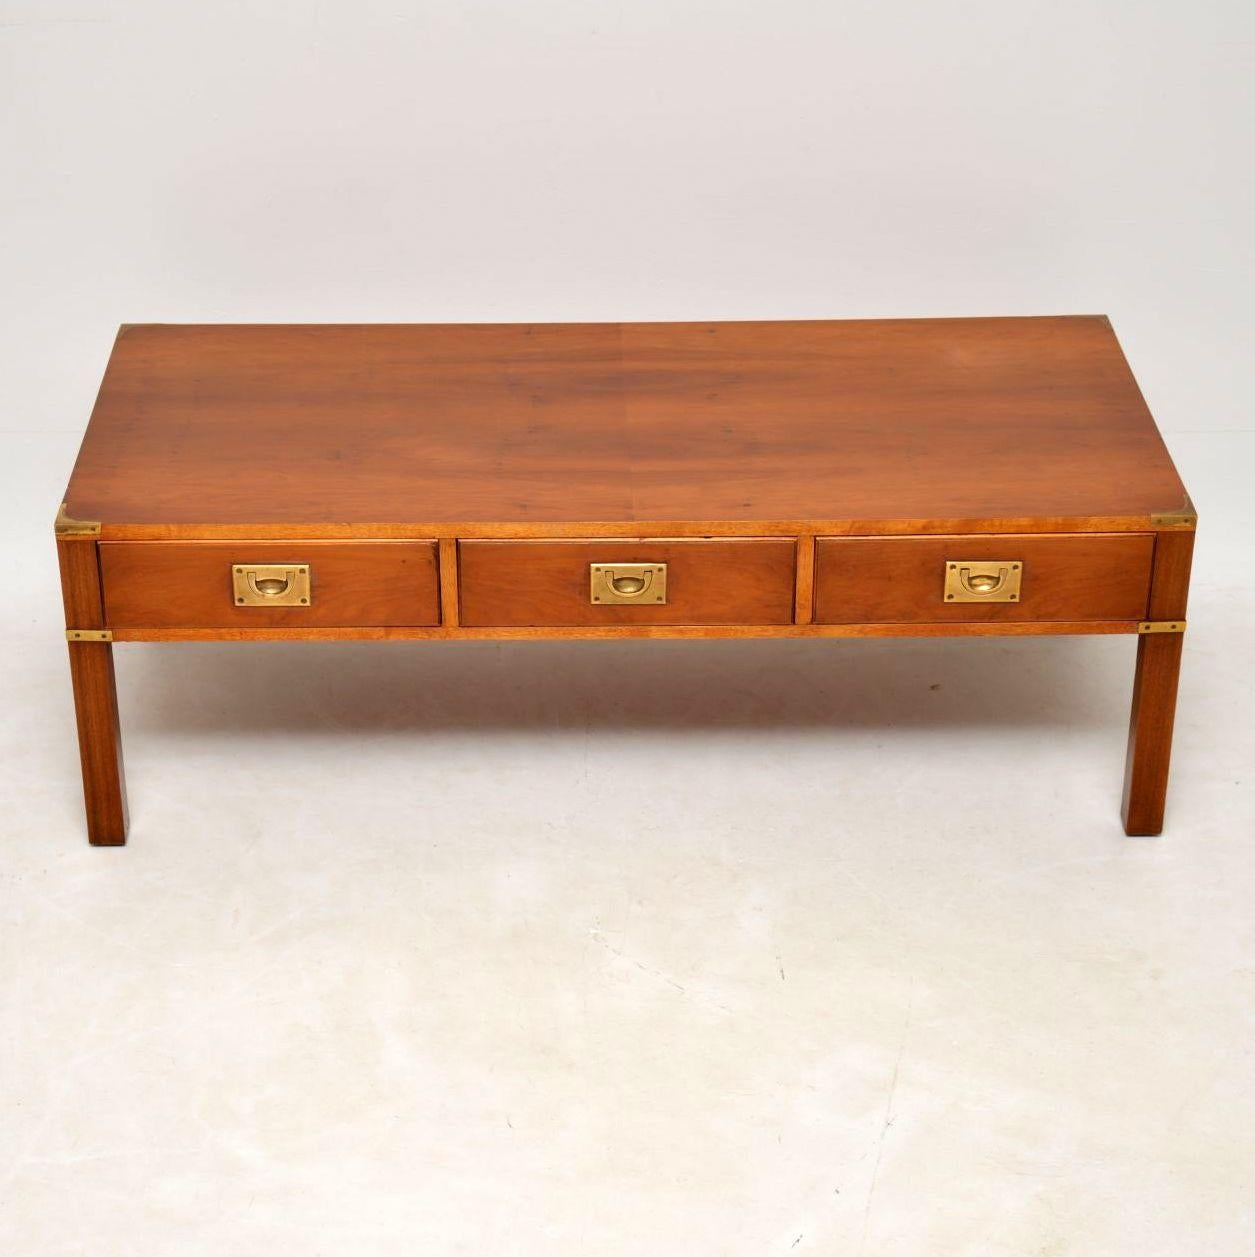 Large yew wood coffee table in the antique Campaign style dating from around the 1950s period & in good condition. It has brass military inset handles & corner fittings on the back & front. There are three drawers on the front & three dummy drawers